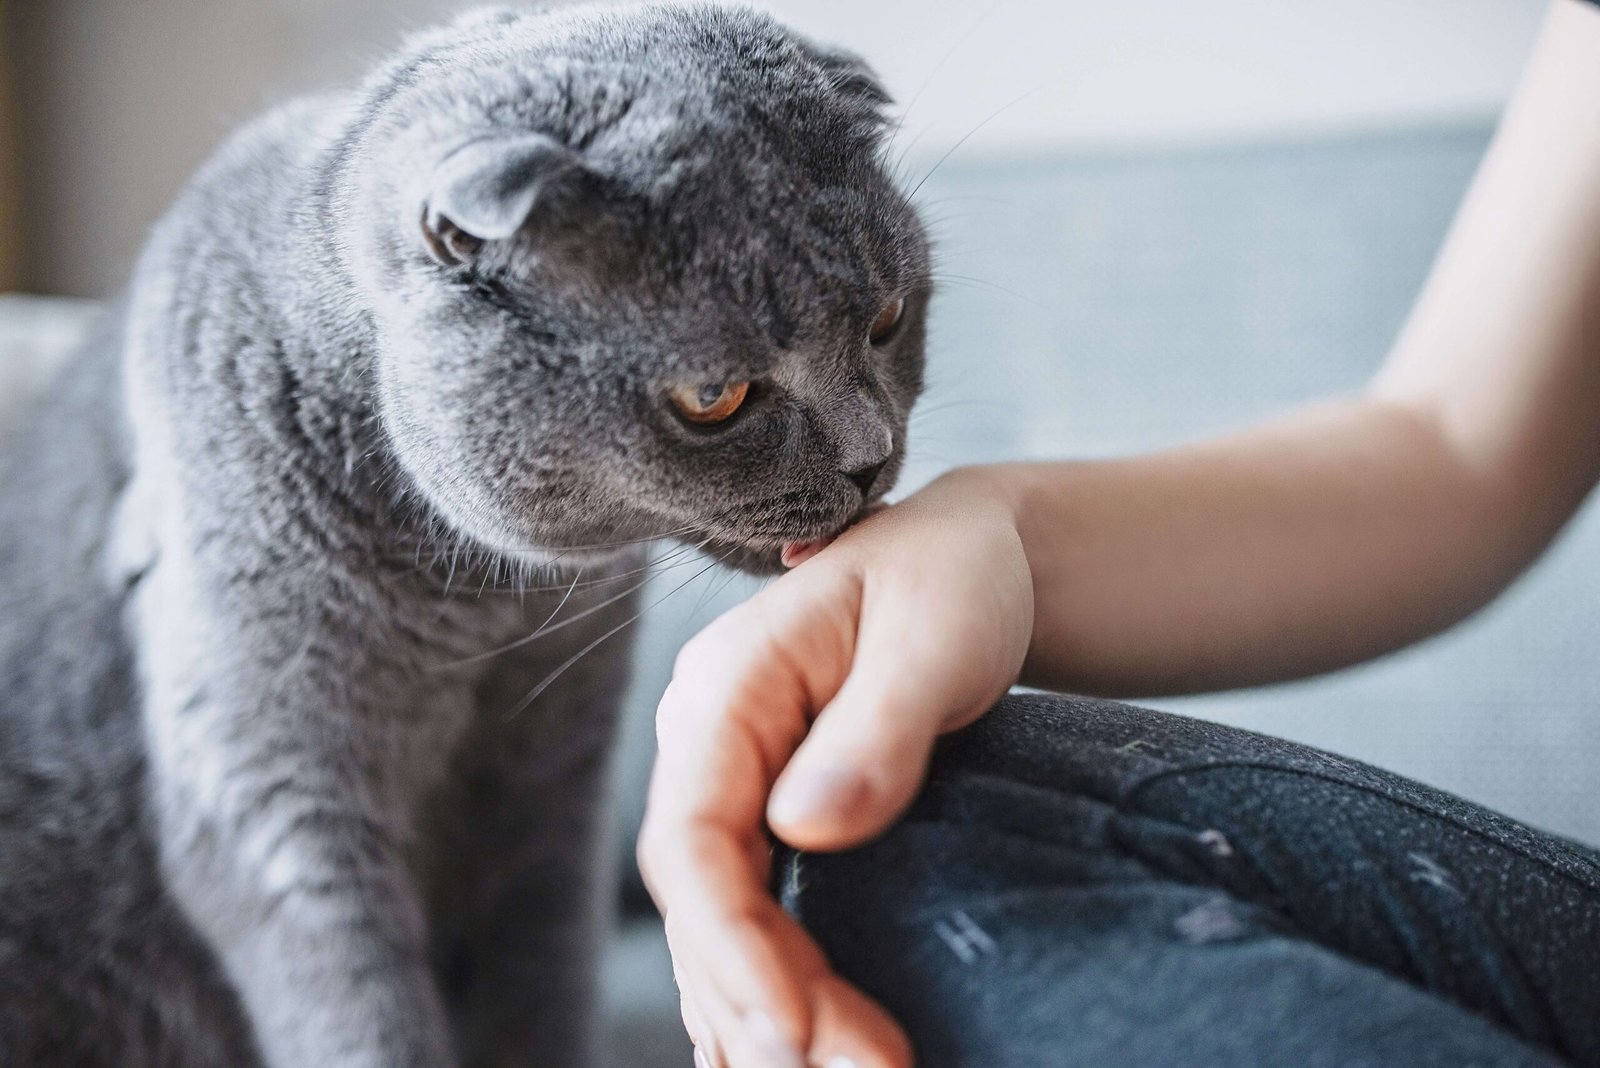 What Does It Mean When a Cat Licks You?